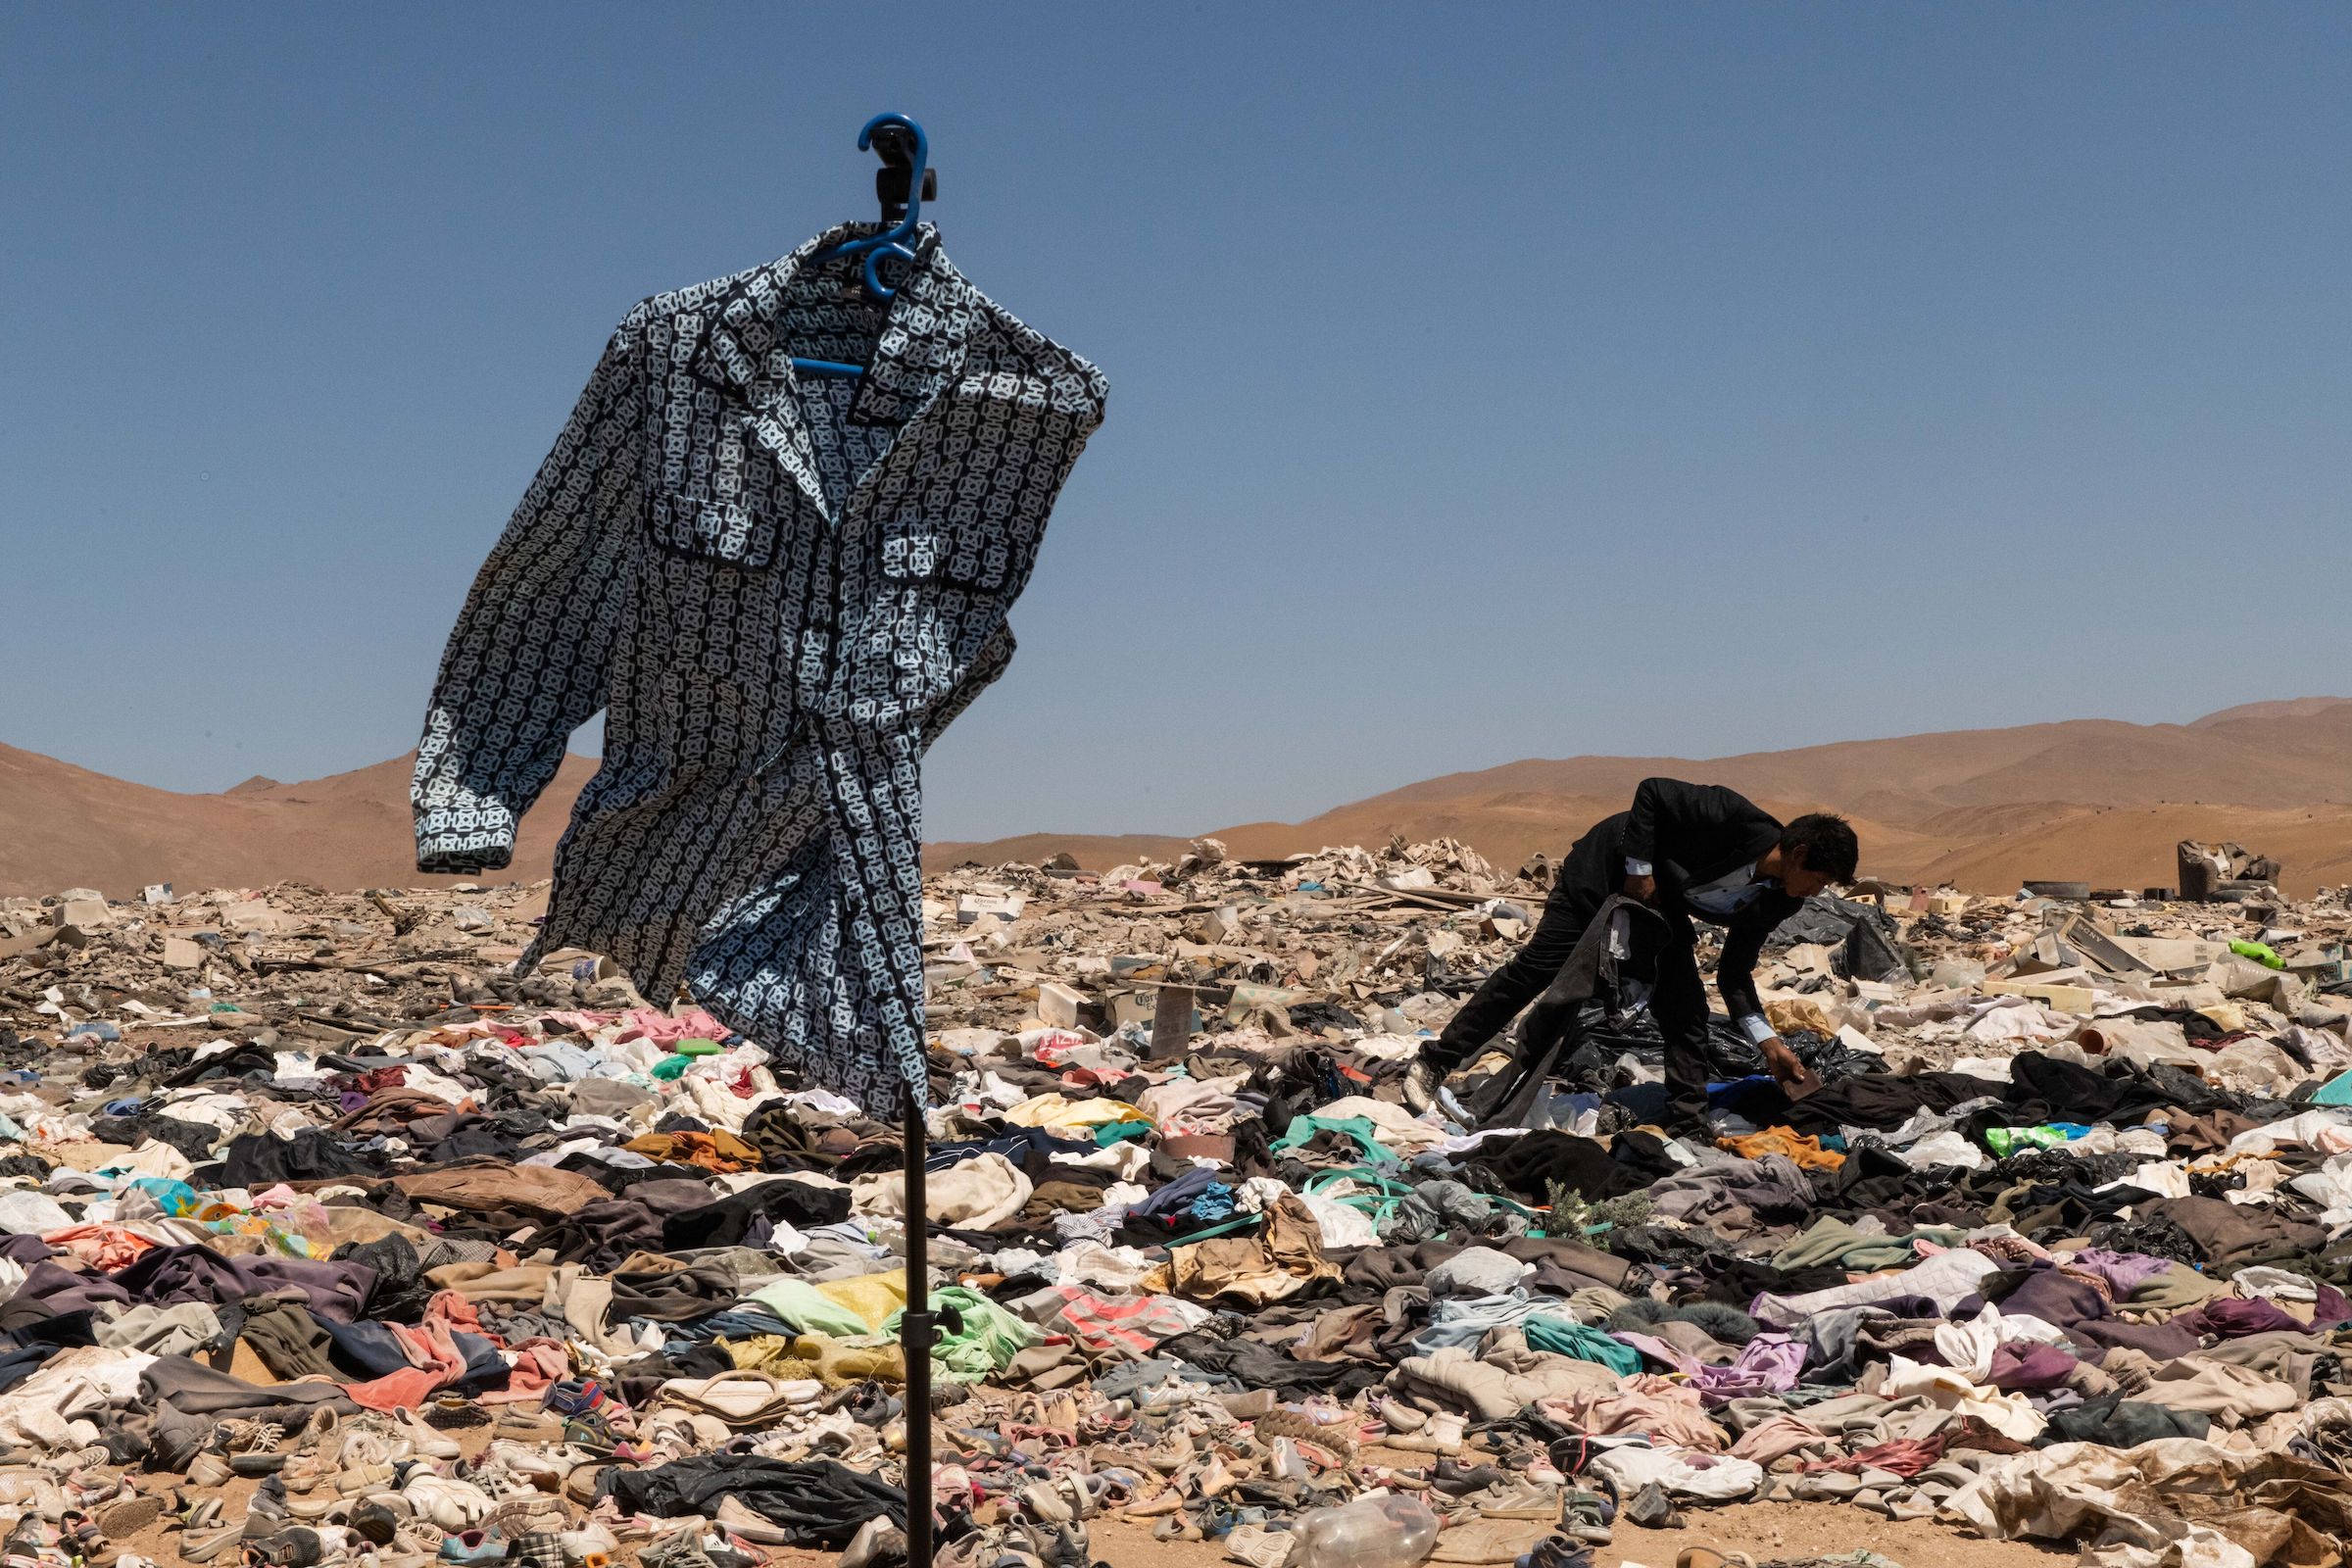 Millions of pieces of clothing lying in the middle of the desert are burned and turned into ash. Chile, May 2022.  (Mauricio Bustamante—Visum/Redux )